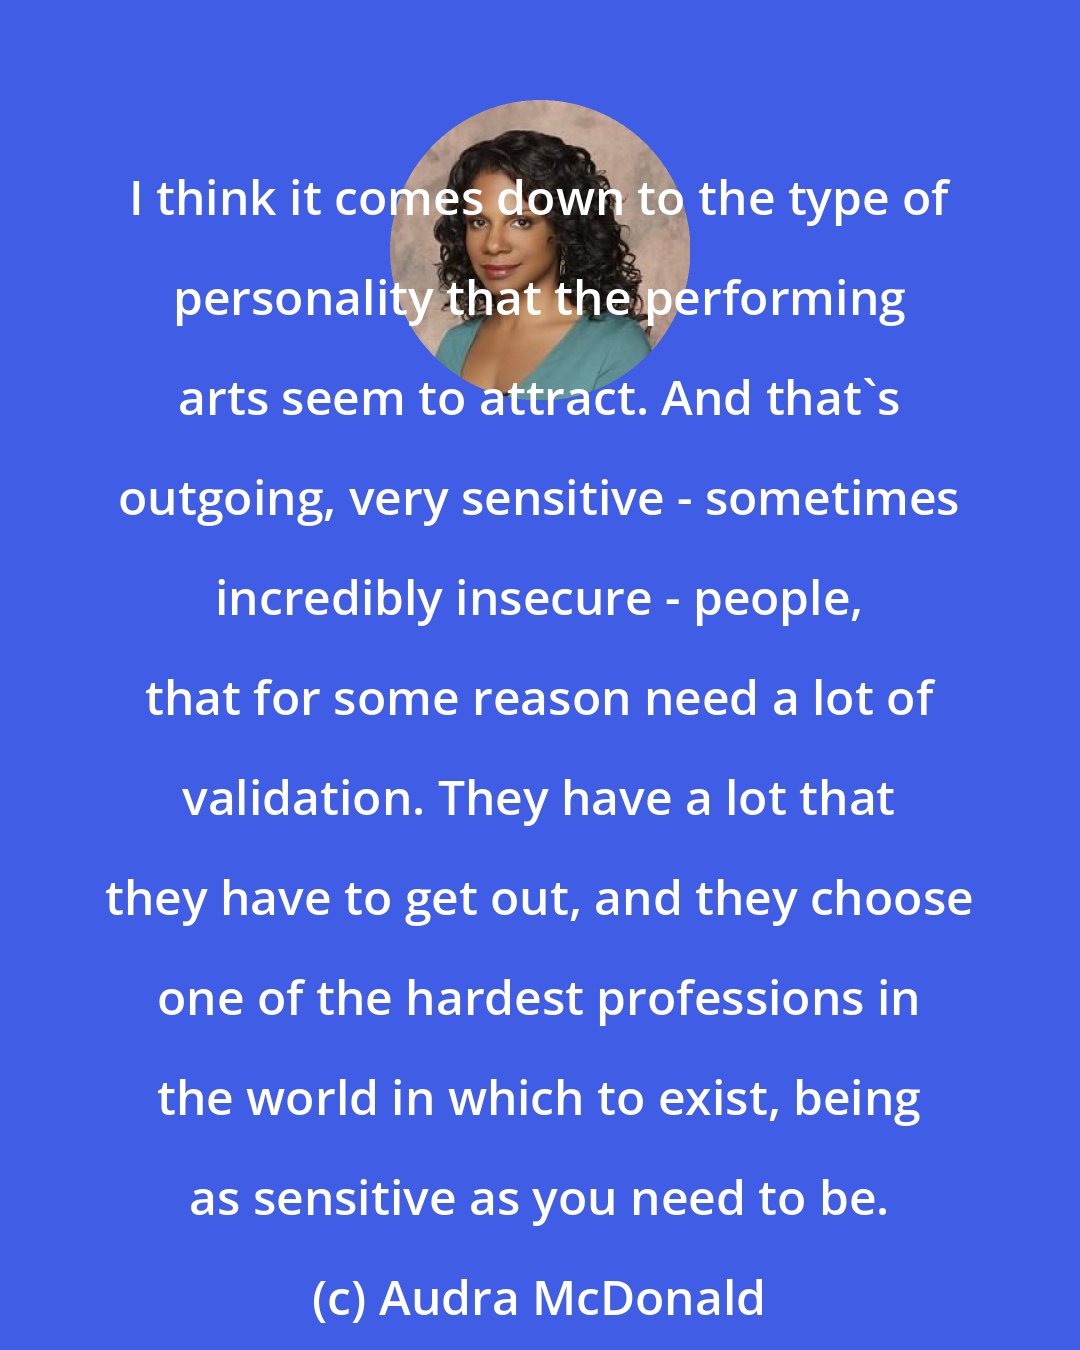 Audra McDonald: I think it comes down to the type of personality that the performing arts seem to attract. And that's outgoing, very sensitive - sometimes incredibly insecure - people, that for some reason need a lot of validation. They have a lot that they have to get out, and they choose one of the hardest professions in the world in which to exist, being as sensitive as you need to be.